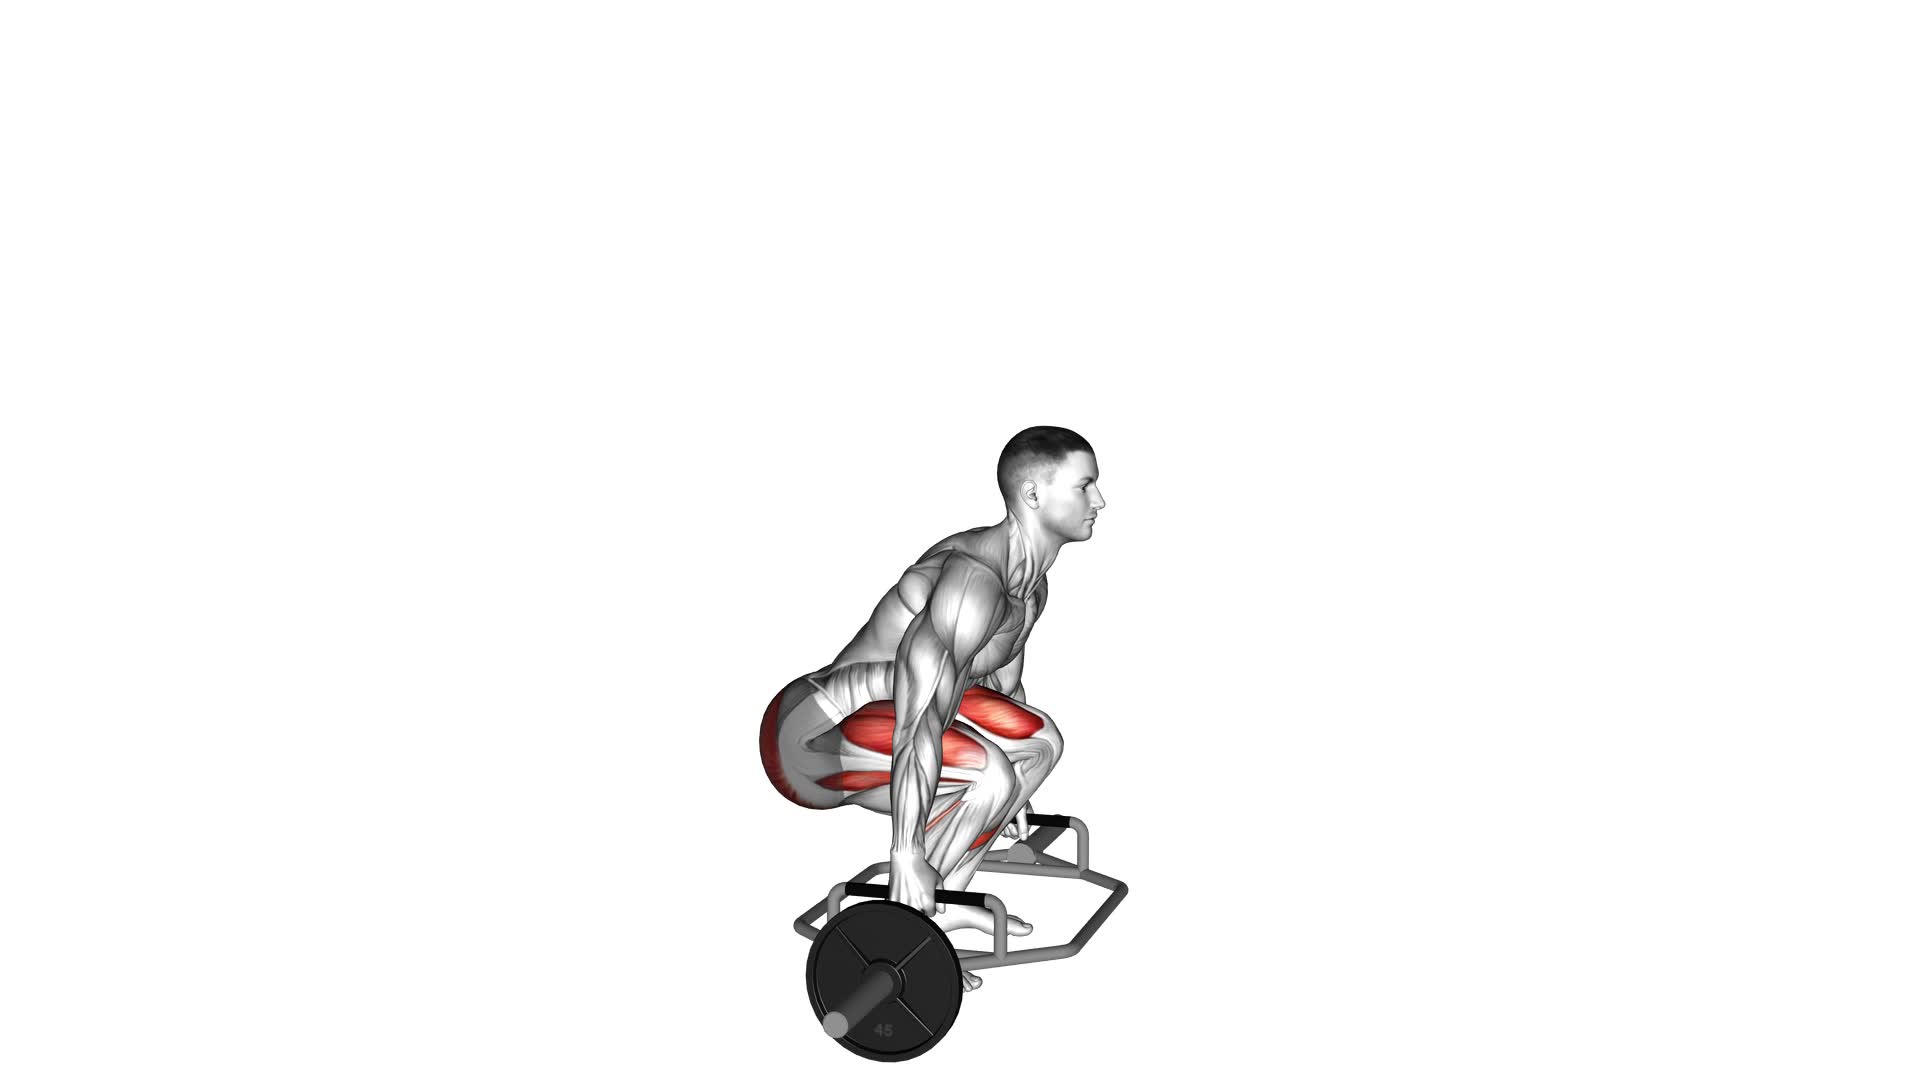 Trap Bar Squat - Video Exercise Guide & Tips